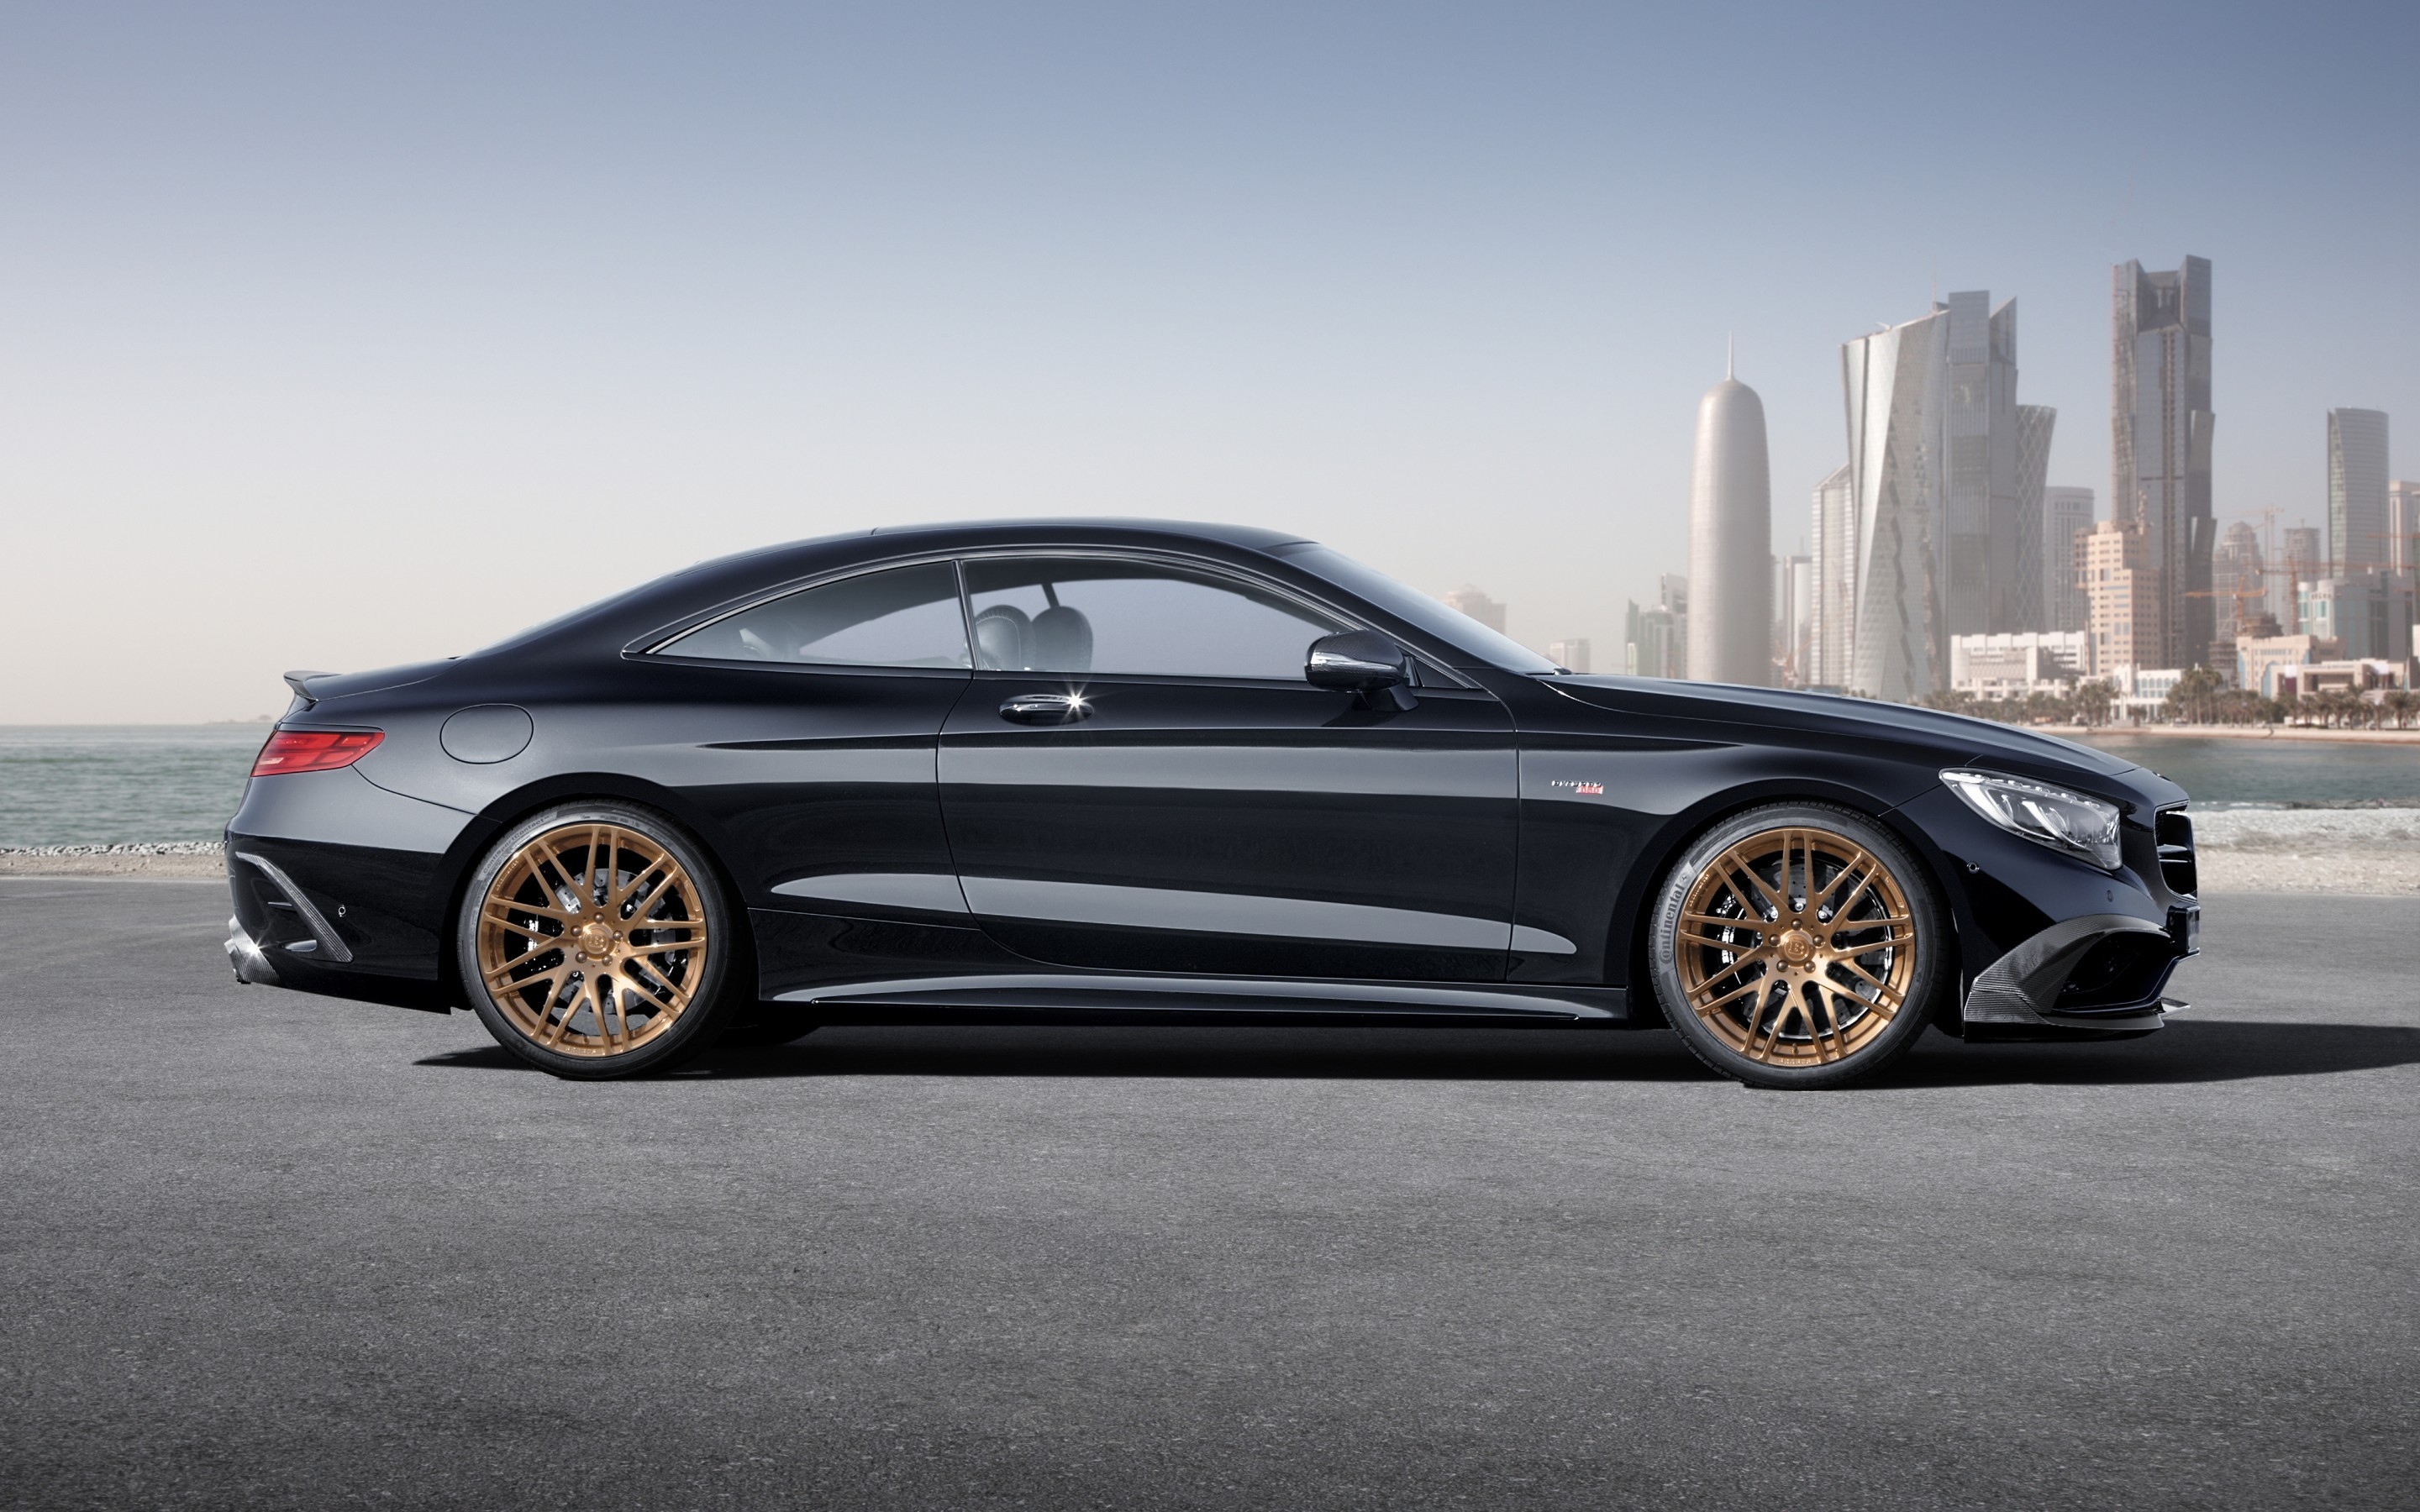 Mercedes Benz S63 AMG Brabus Side View for 2880 x 1800 Retina Display resolution